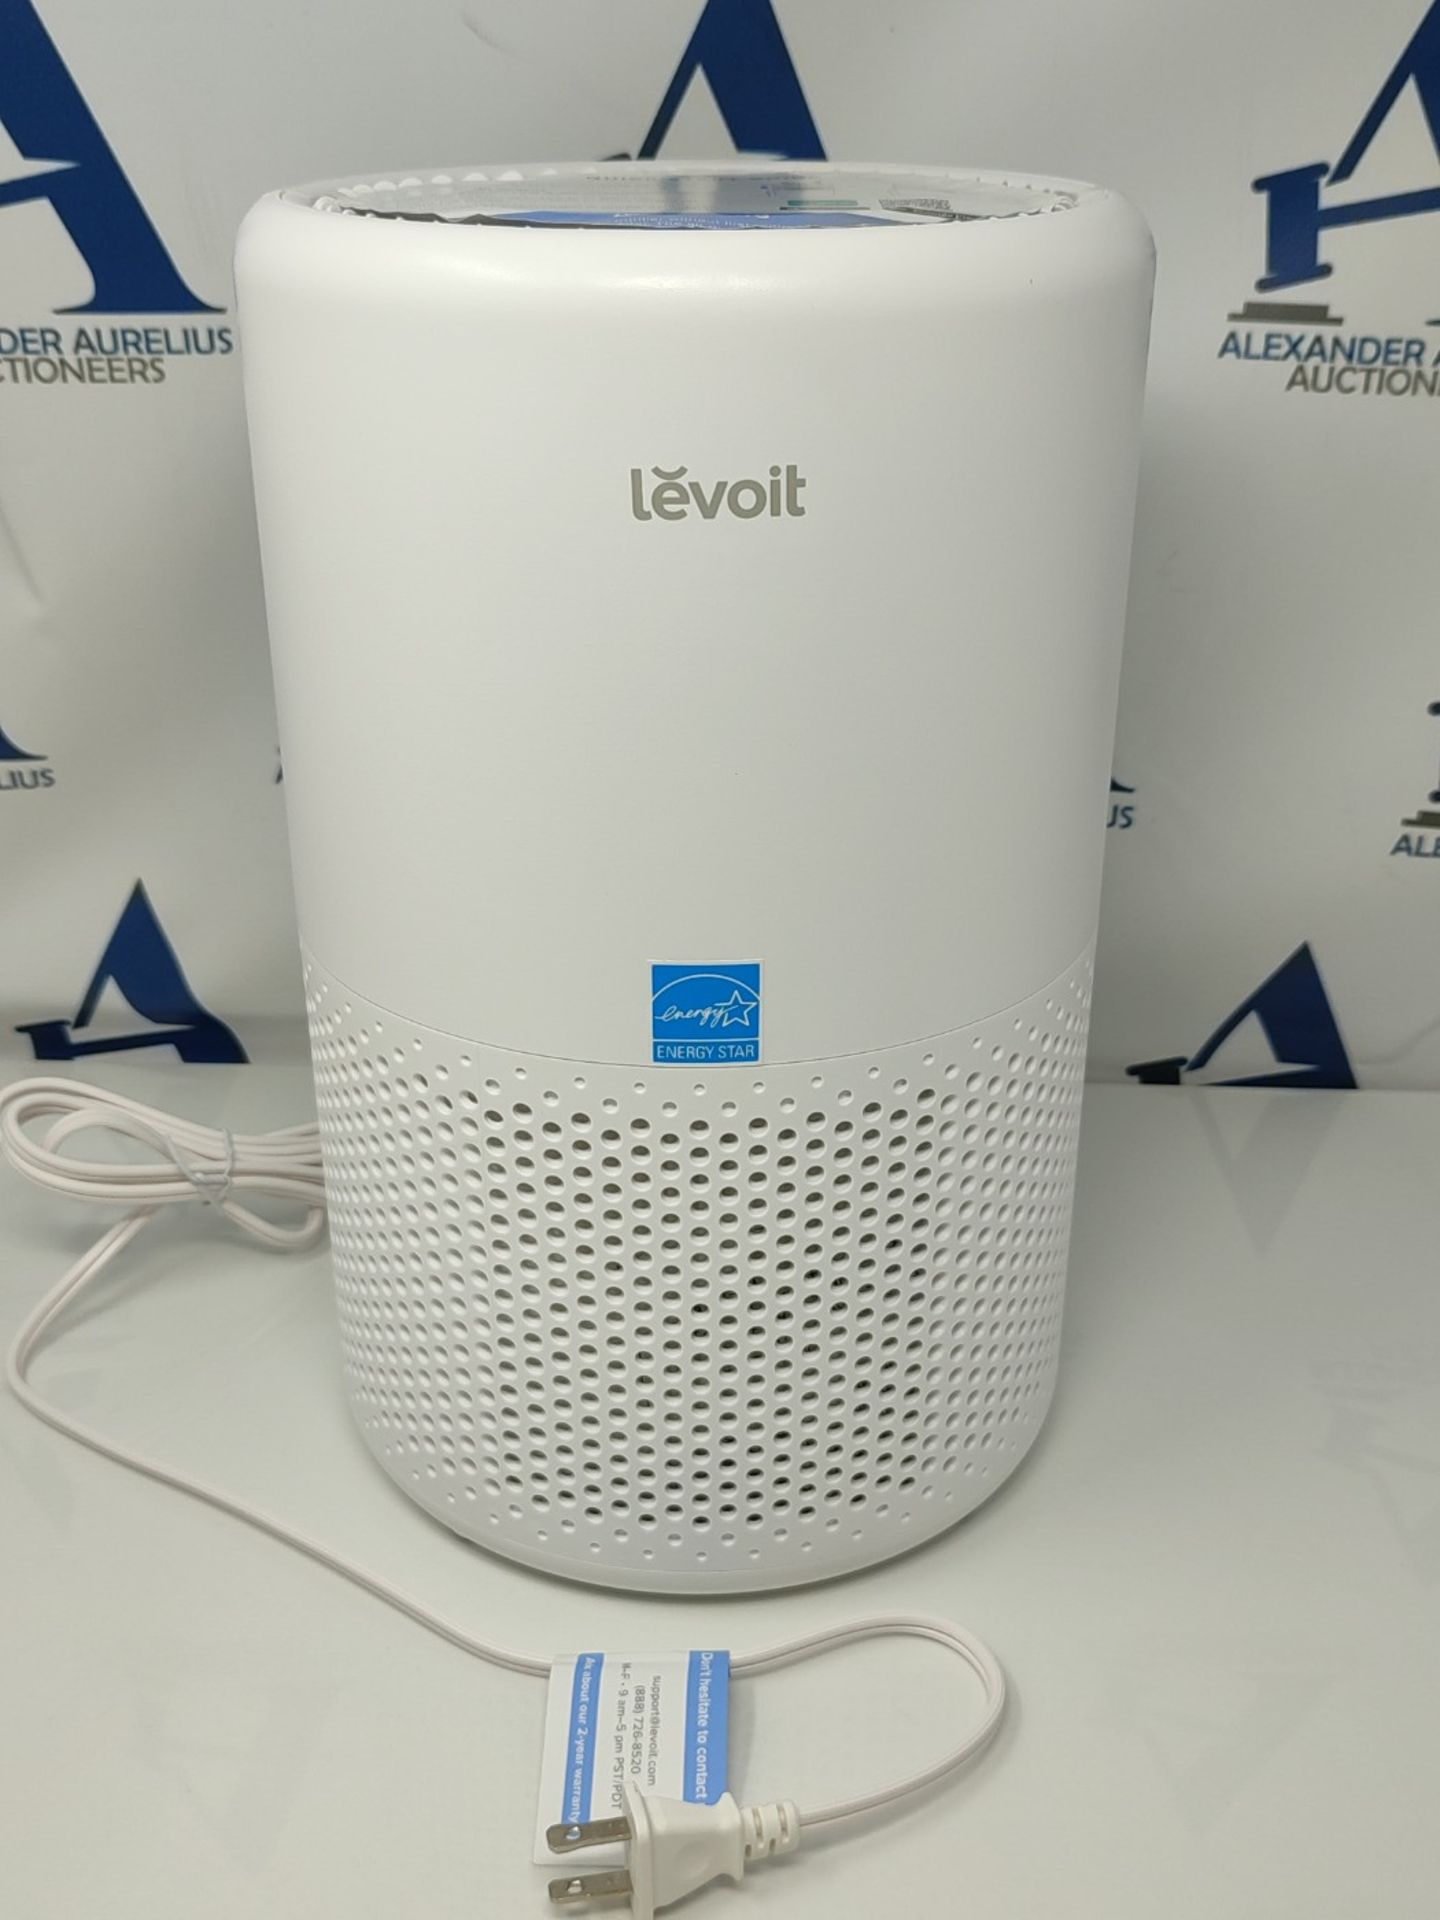 RRP £89.00 LEVOIT Smart WiFi Air Purifier for Home, Alexa Enabled H13 HEPA Filter, CADR 170m³/h, - Image 3 of 3